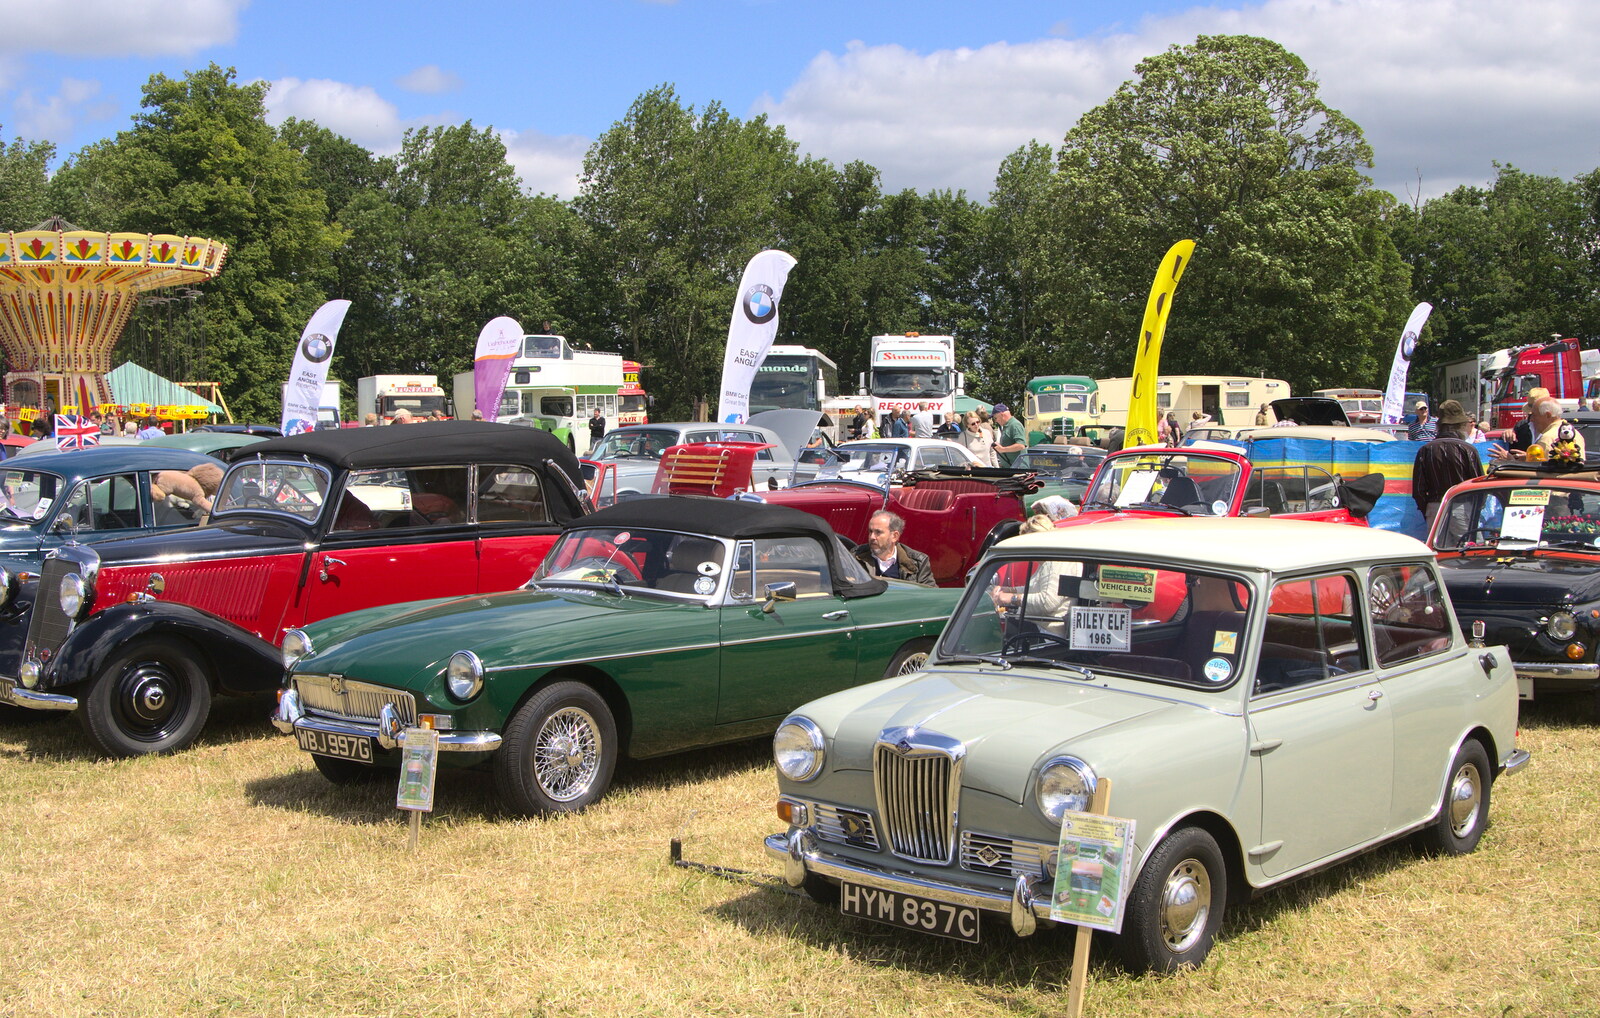 More classic motors, including a Riley Elf from A Vintage Tractorey Sort of Day, Palgrave, Suffolk - 21st June 2015